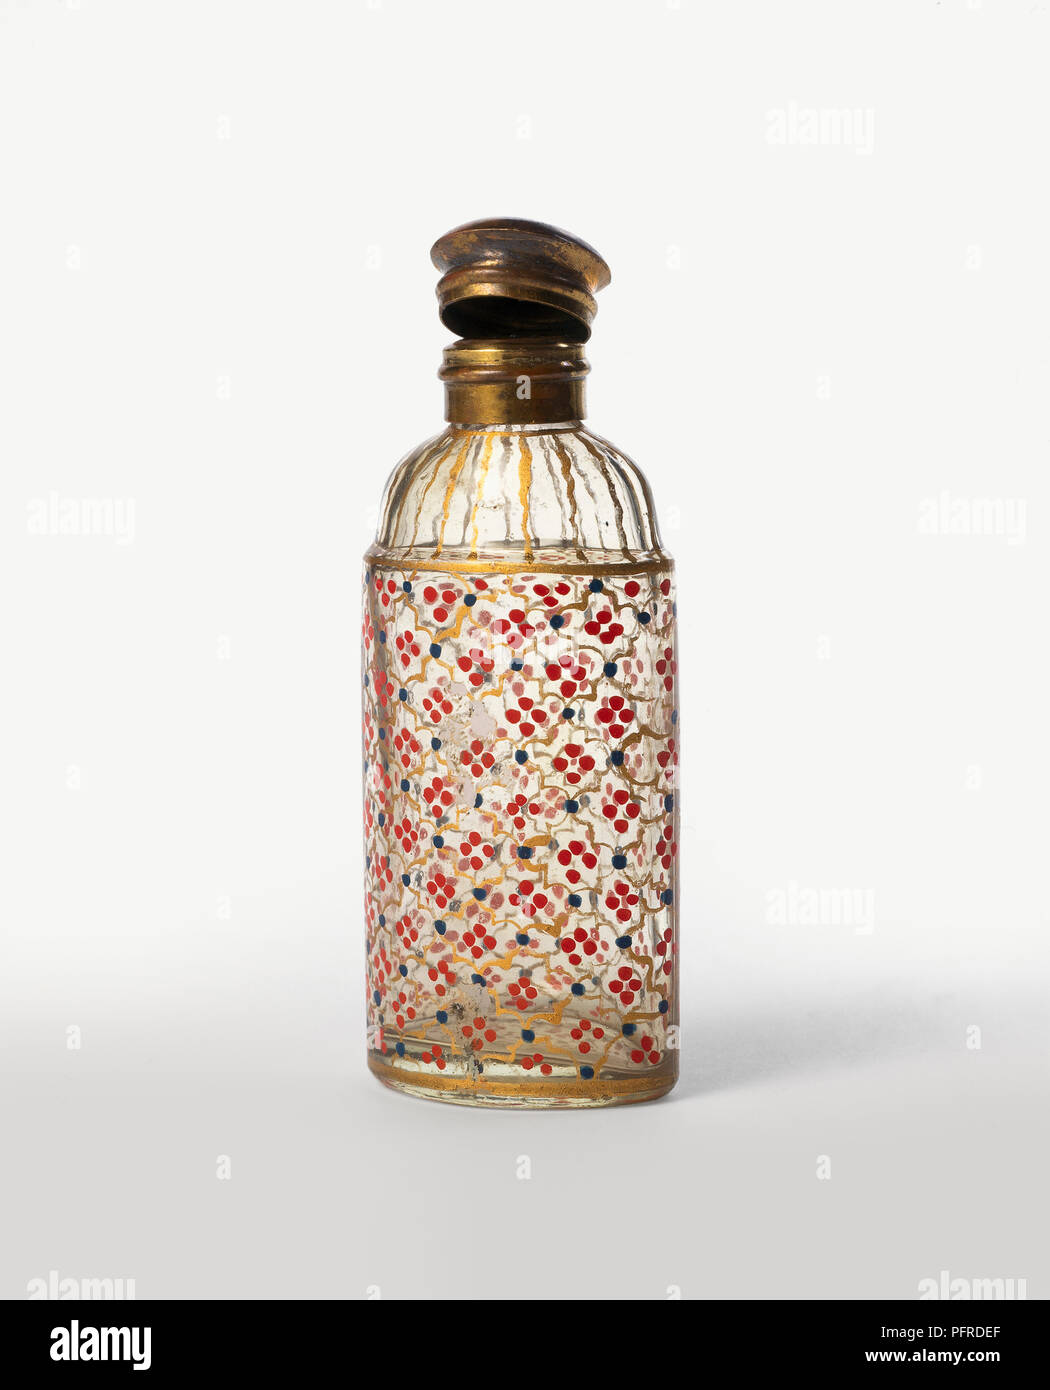 Intricately decorated old fashioned perfume bottle with open gold lid Stock Photo